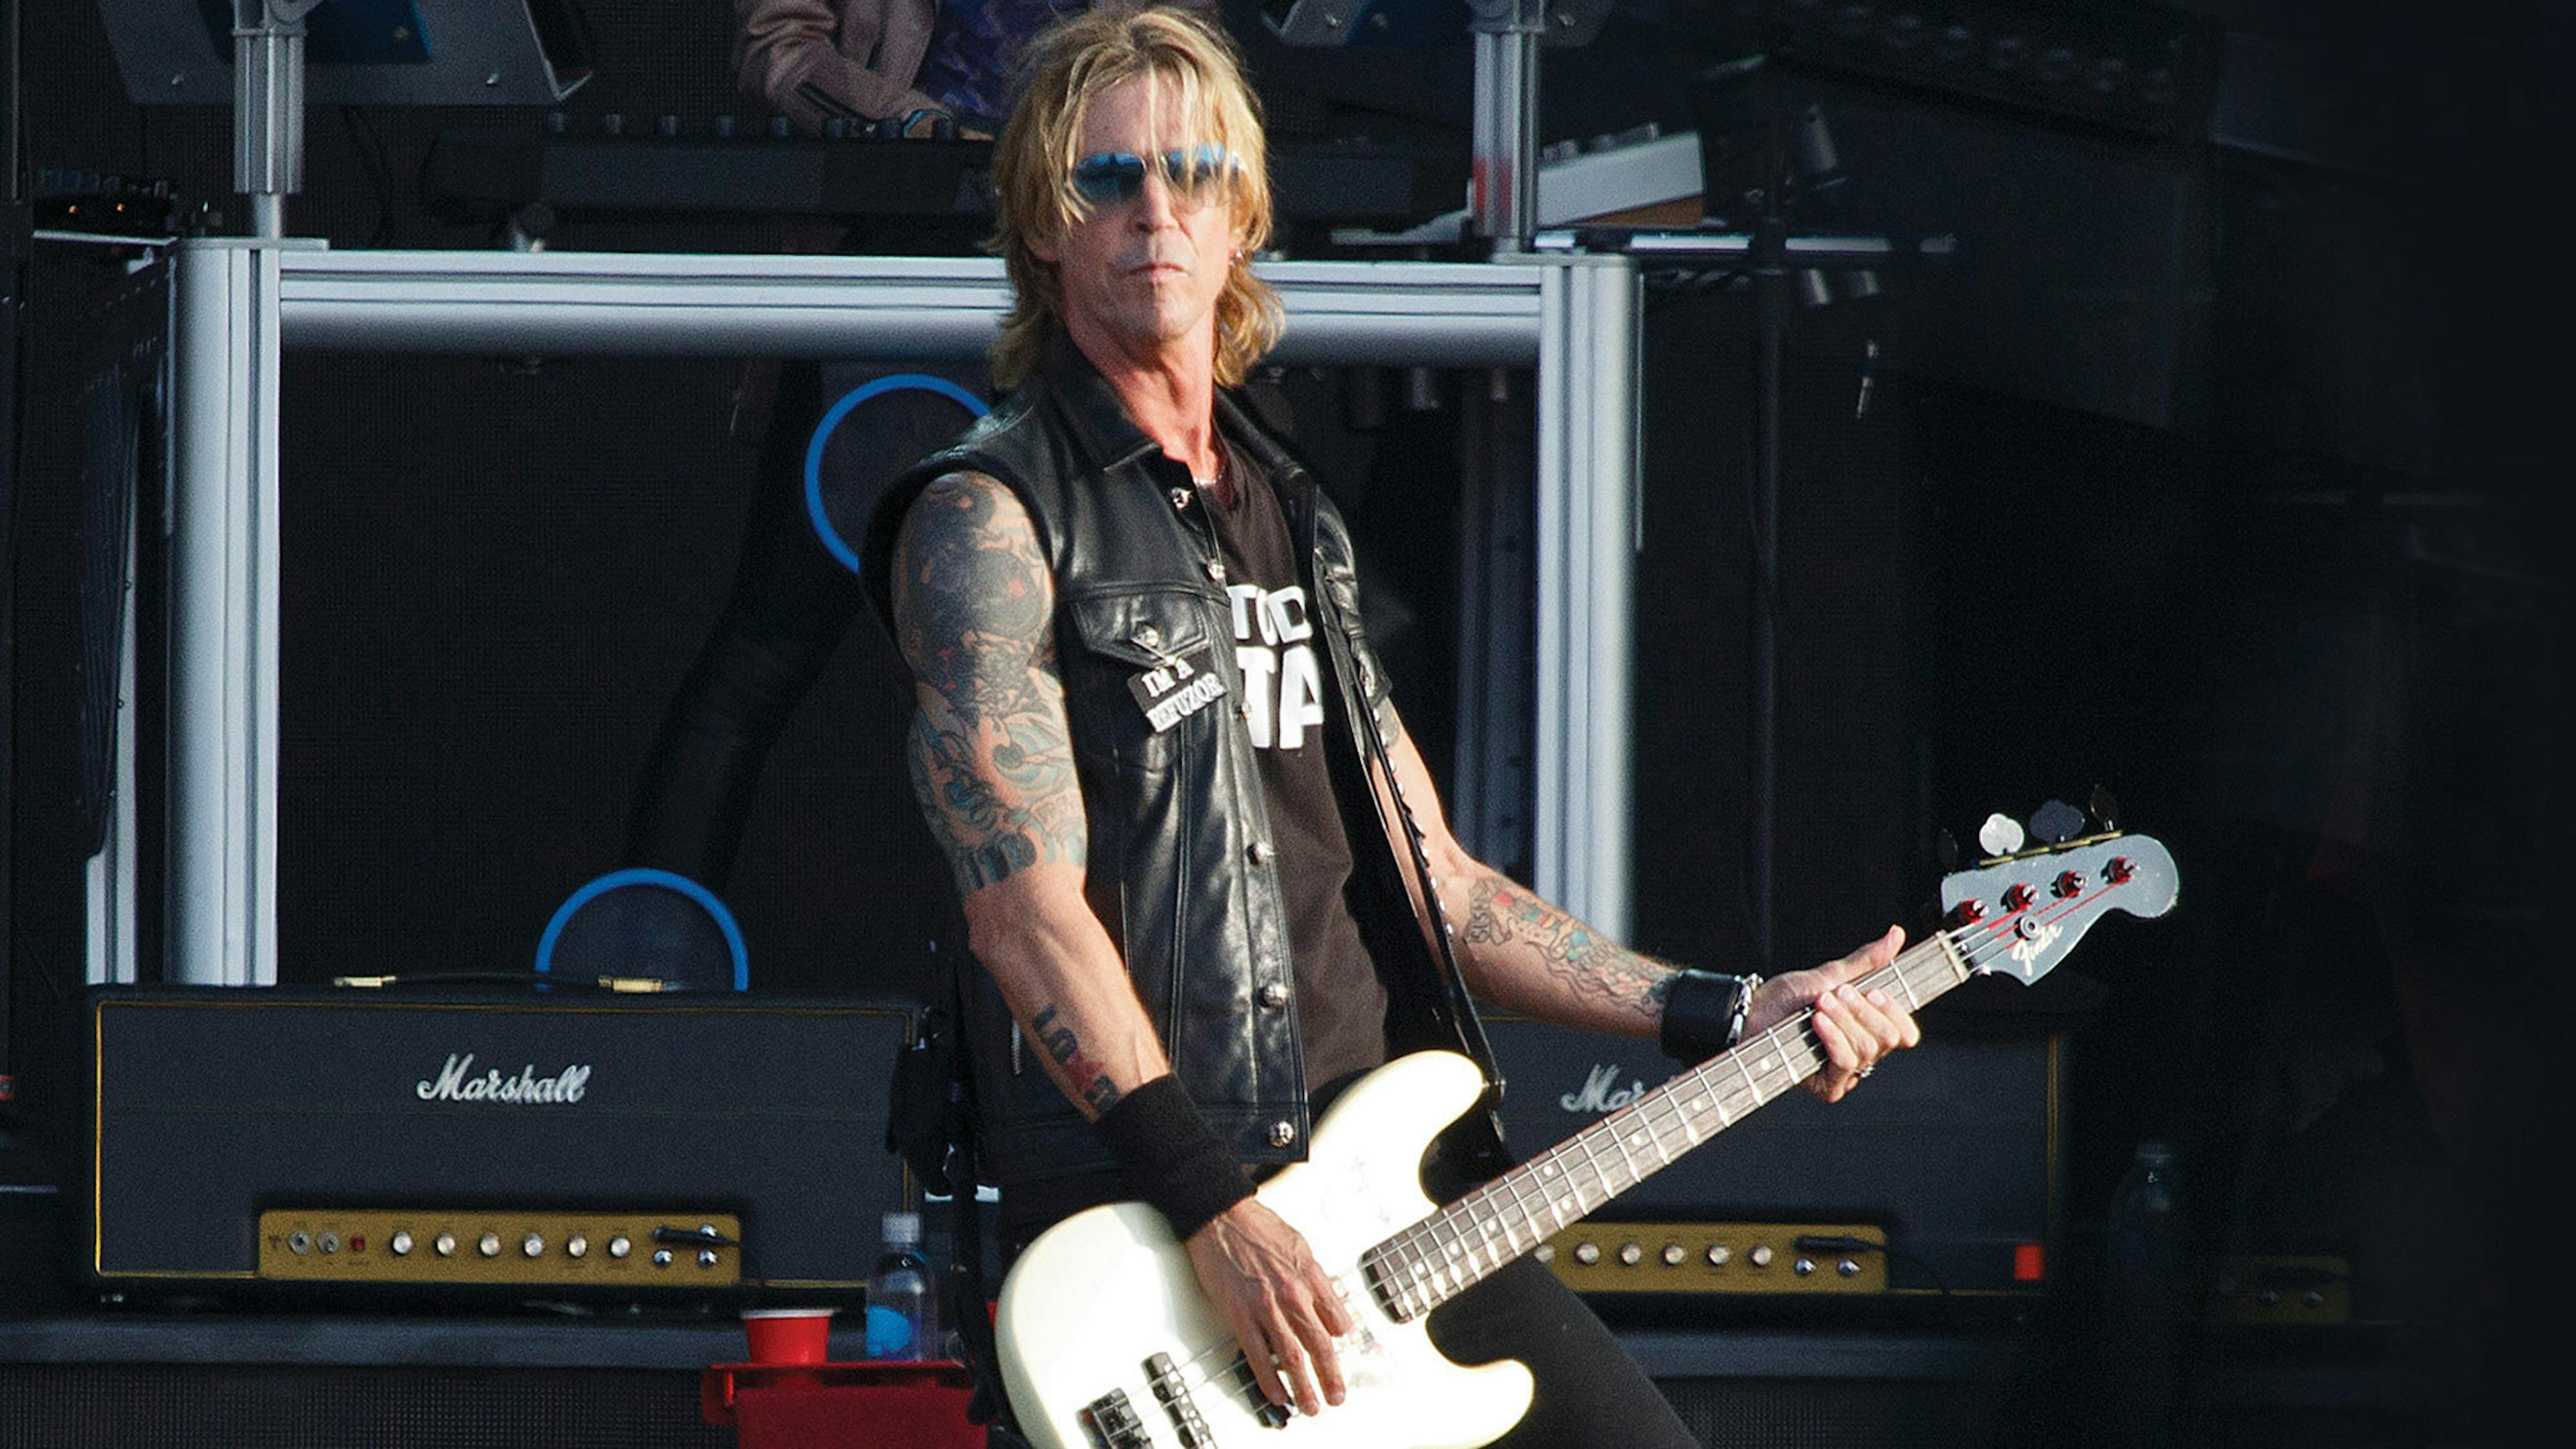 The 5 shows that changed Duff McKagan's life